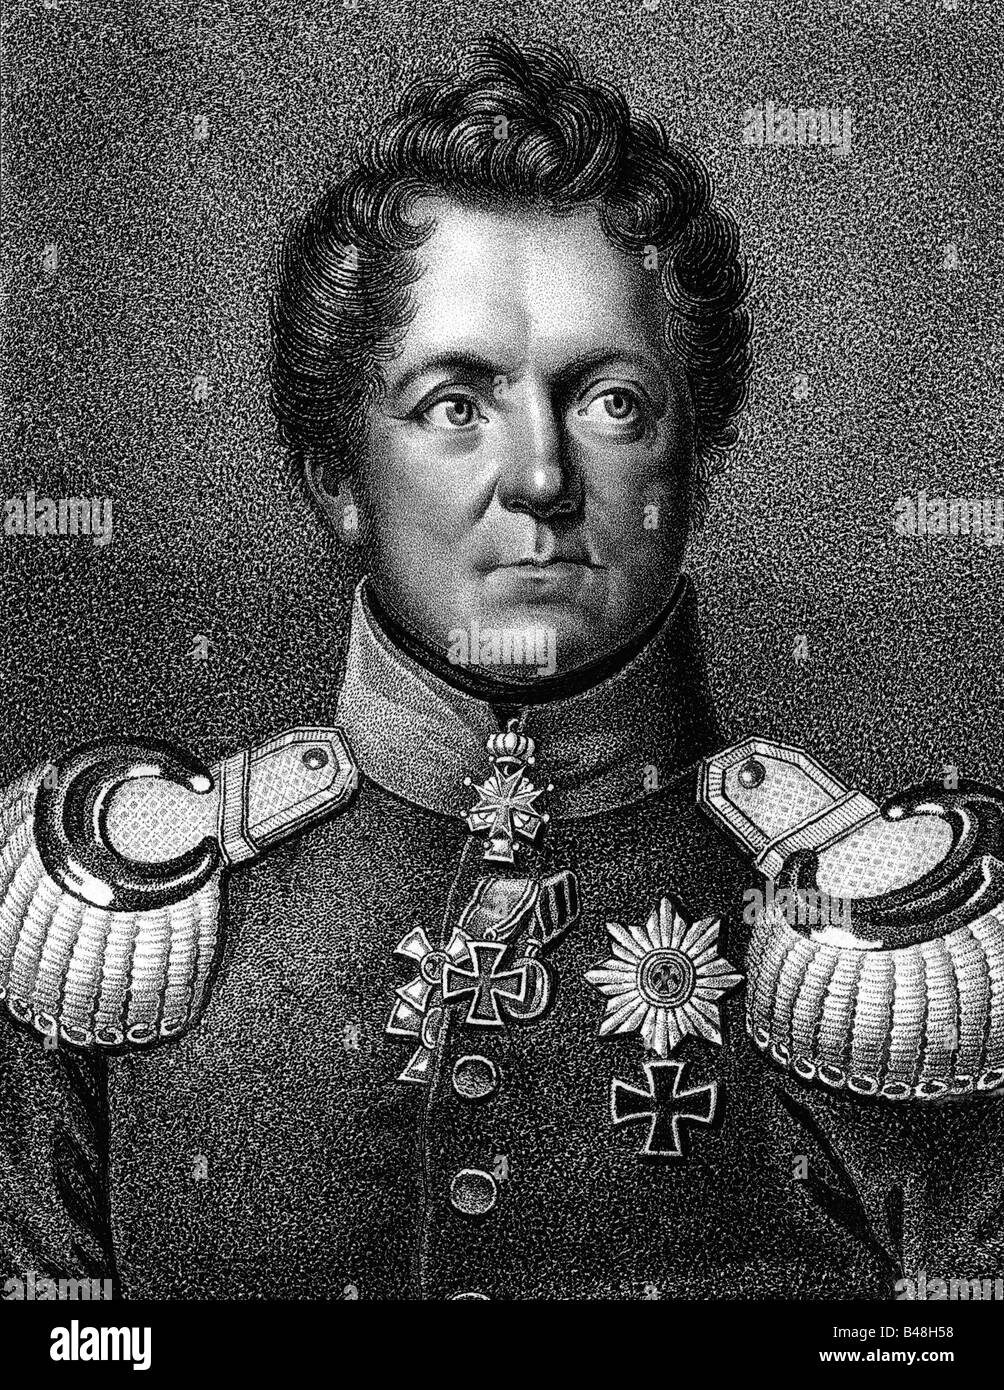 Gneisenau, August Wilhelm Graf Neidhardt von, 27.10.1760 - 23.8.1831, Prussian general, portrait, steel engraving by Falcke after painting by Franz Krueger, 19th century, , Artist's Copyright has not to be cleared Stock Photo